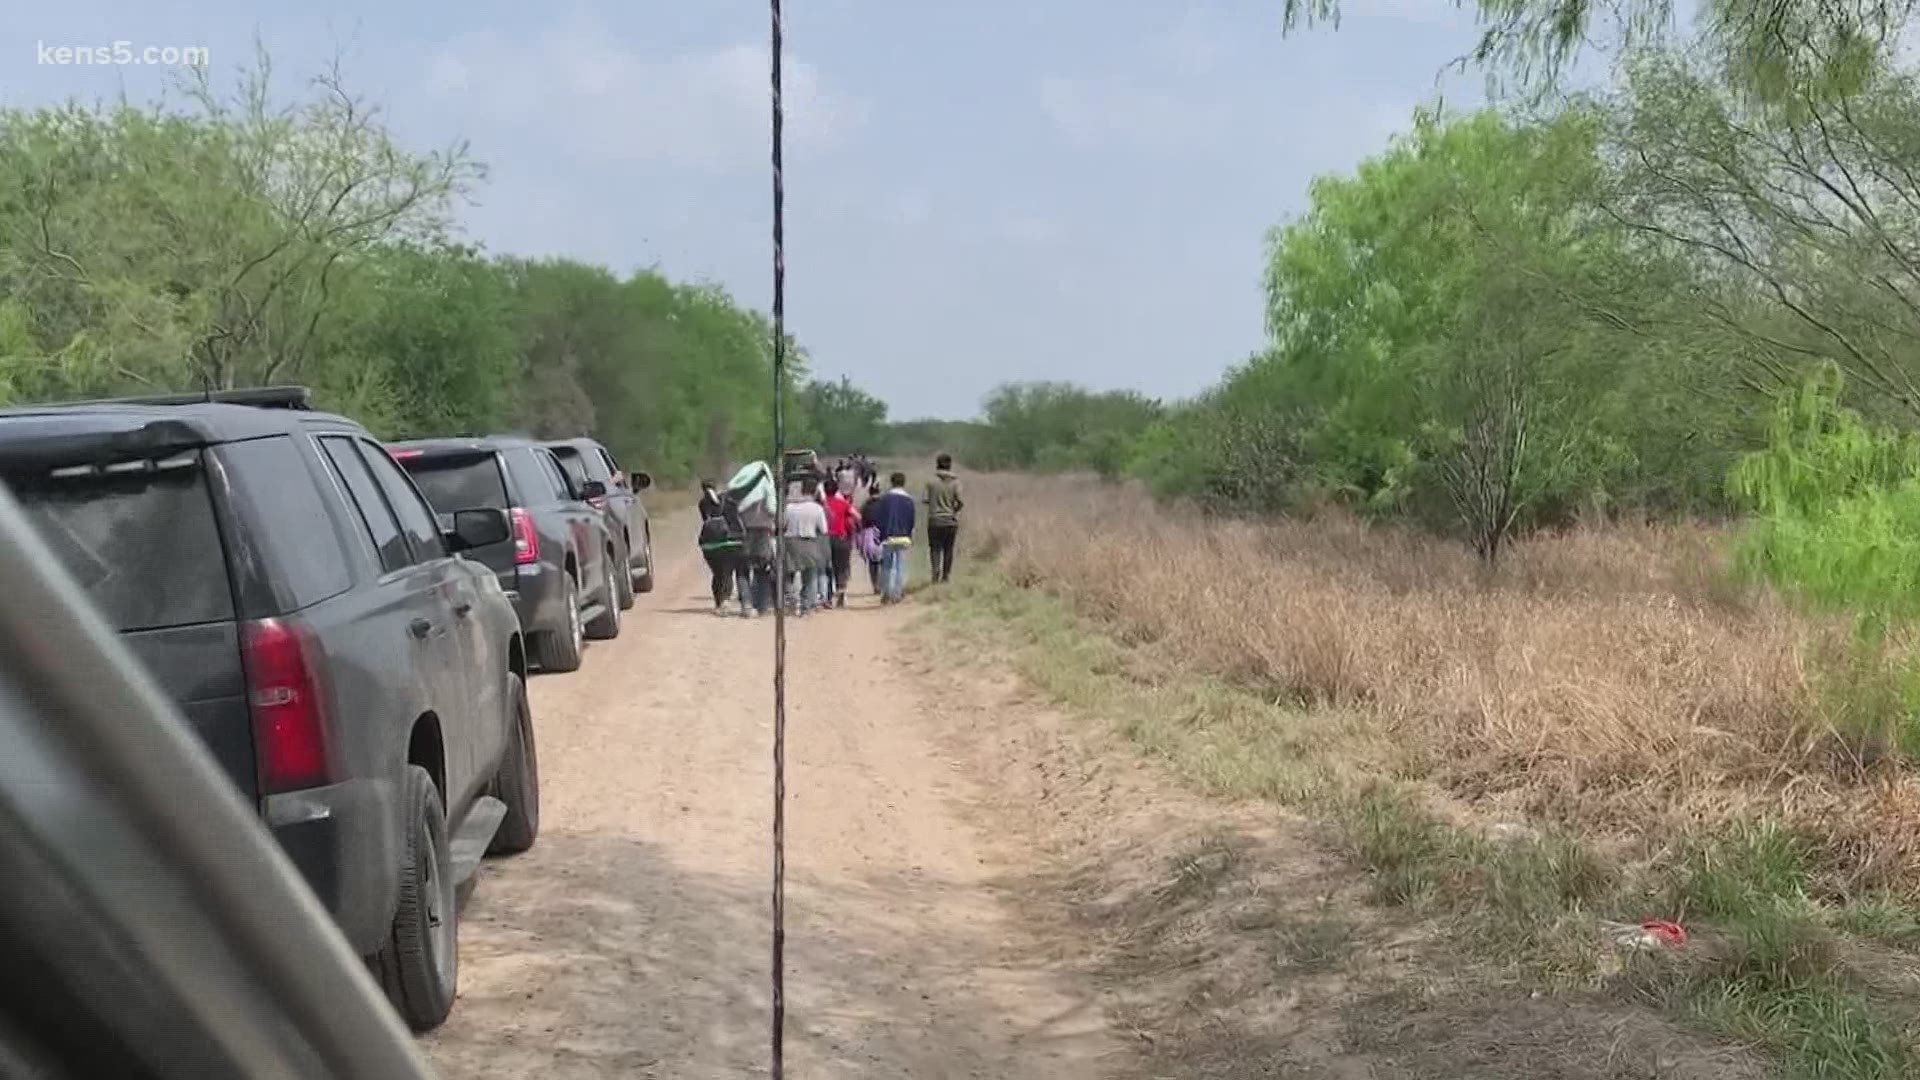 It doesn't take long to come across families making their way across the river toward intake centers in south Texas. But authorities are worried about another issue.